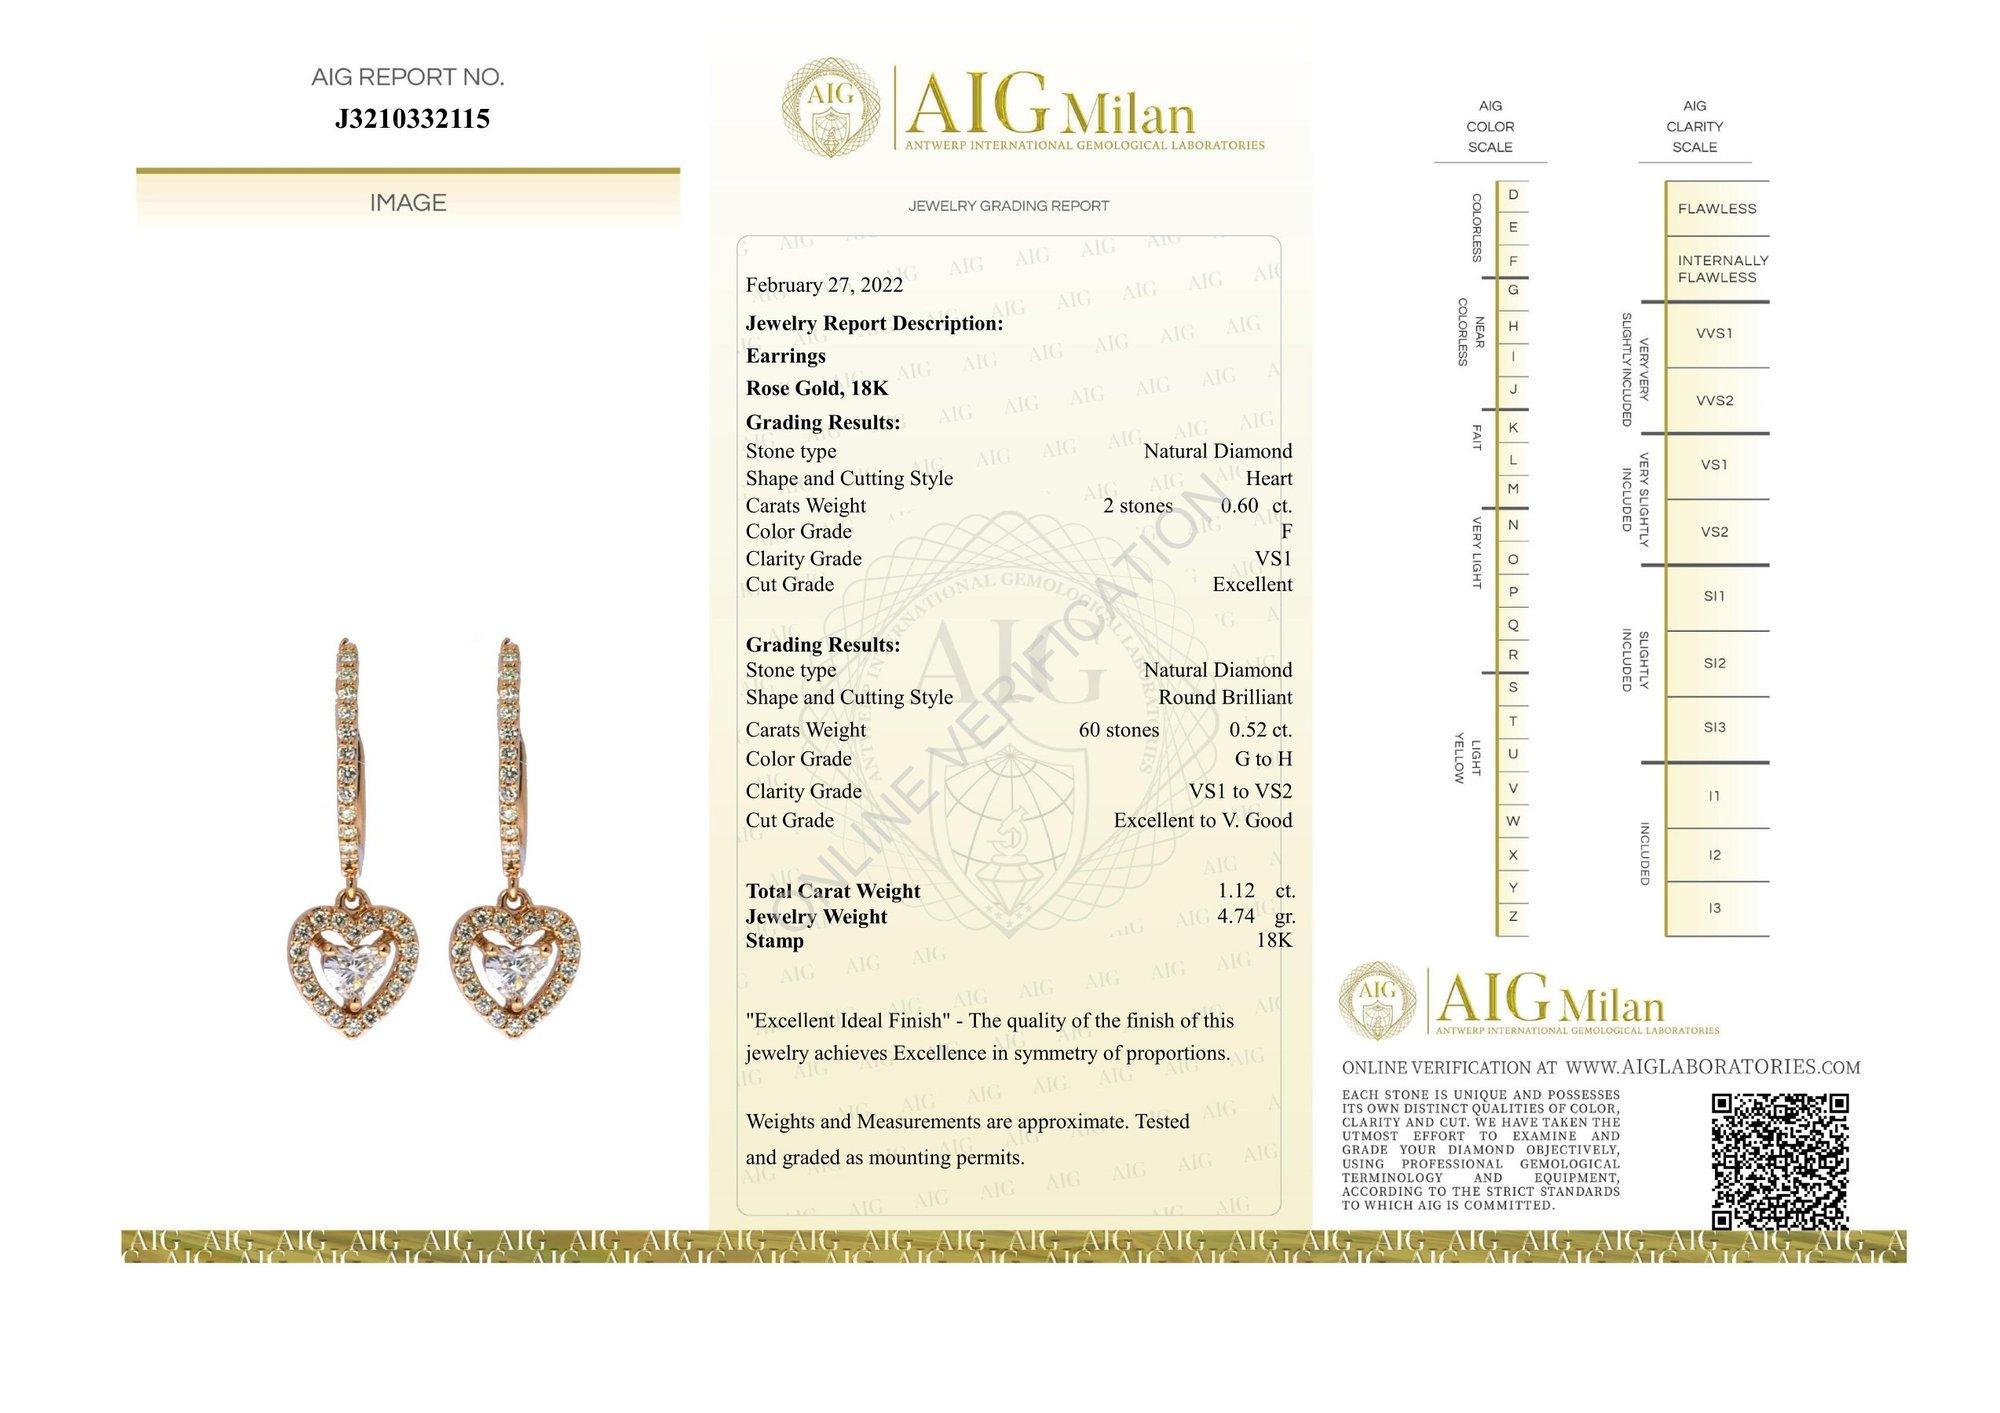 Amazing  pair of natural heart shape diamonds mounted in a drop style earrings with Brilliant diamonds with a total of 1.12 carat of natural and ideal cut diamonds 
the earrings made from 18k rose gold diamond earrings with AIG certificate.

-2